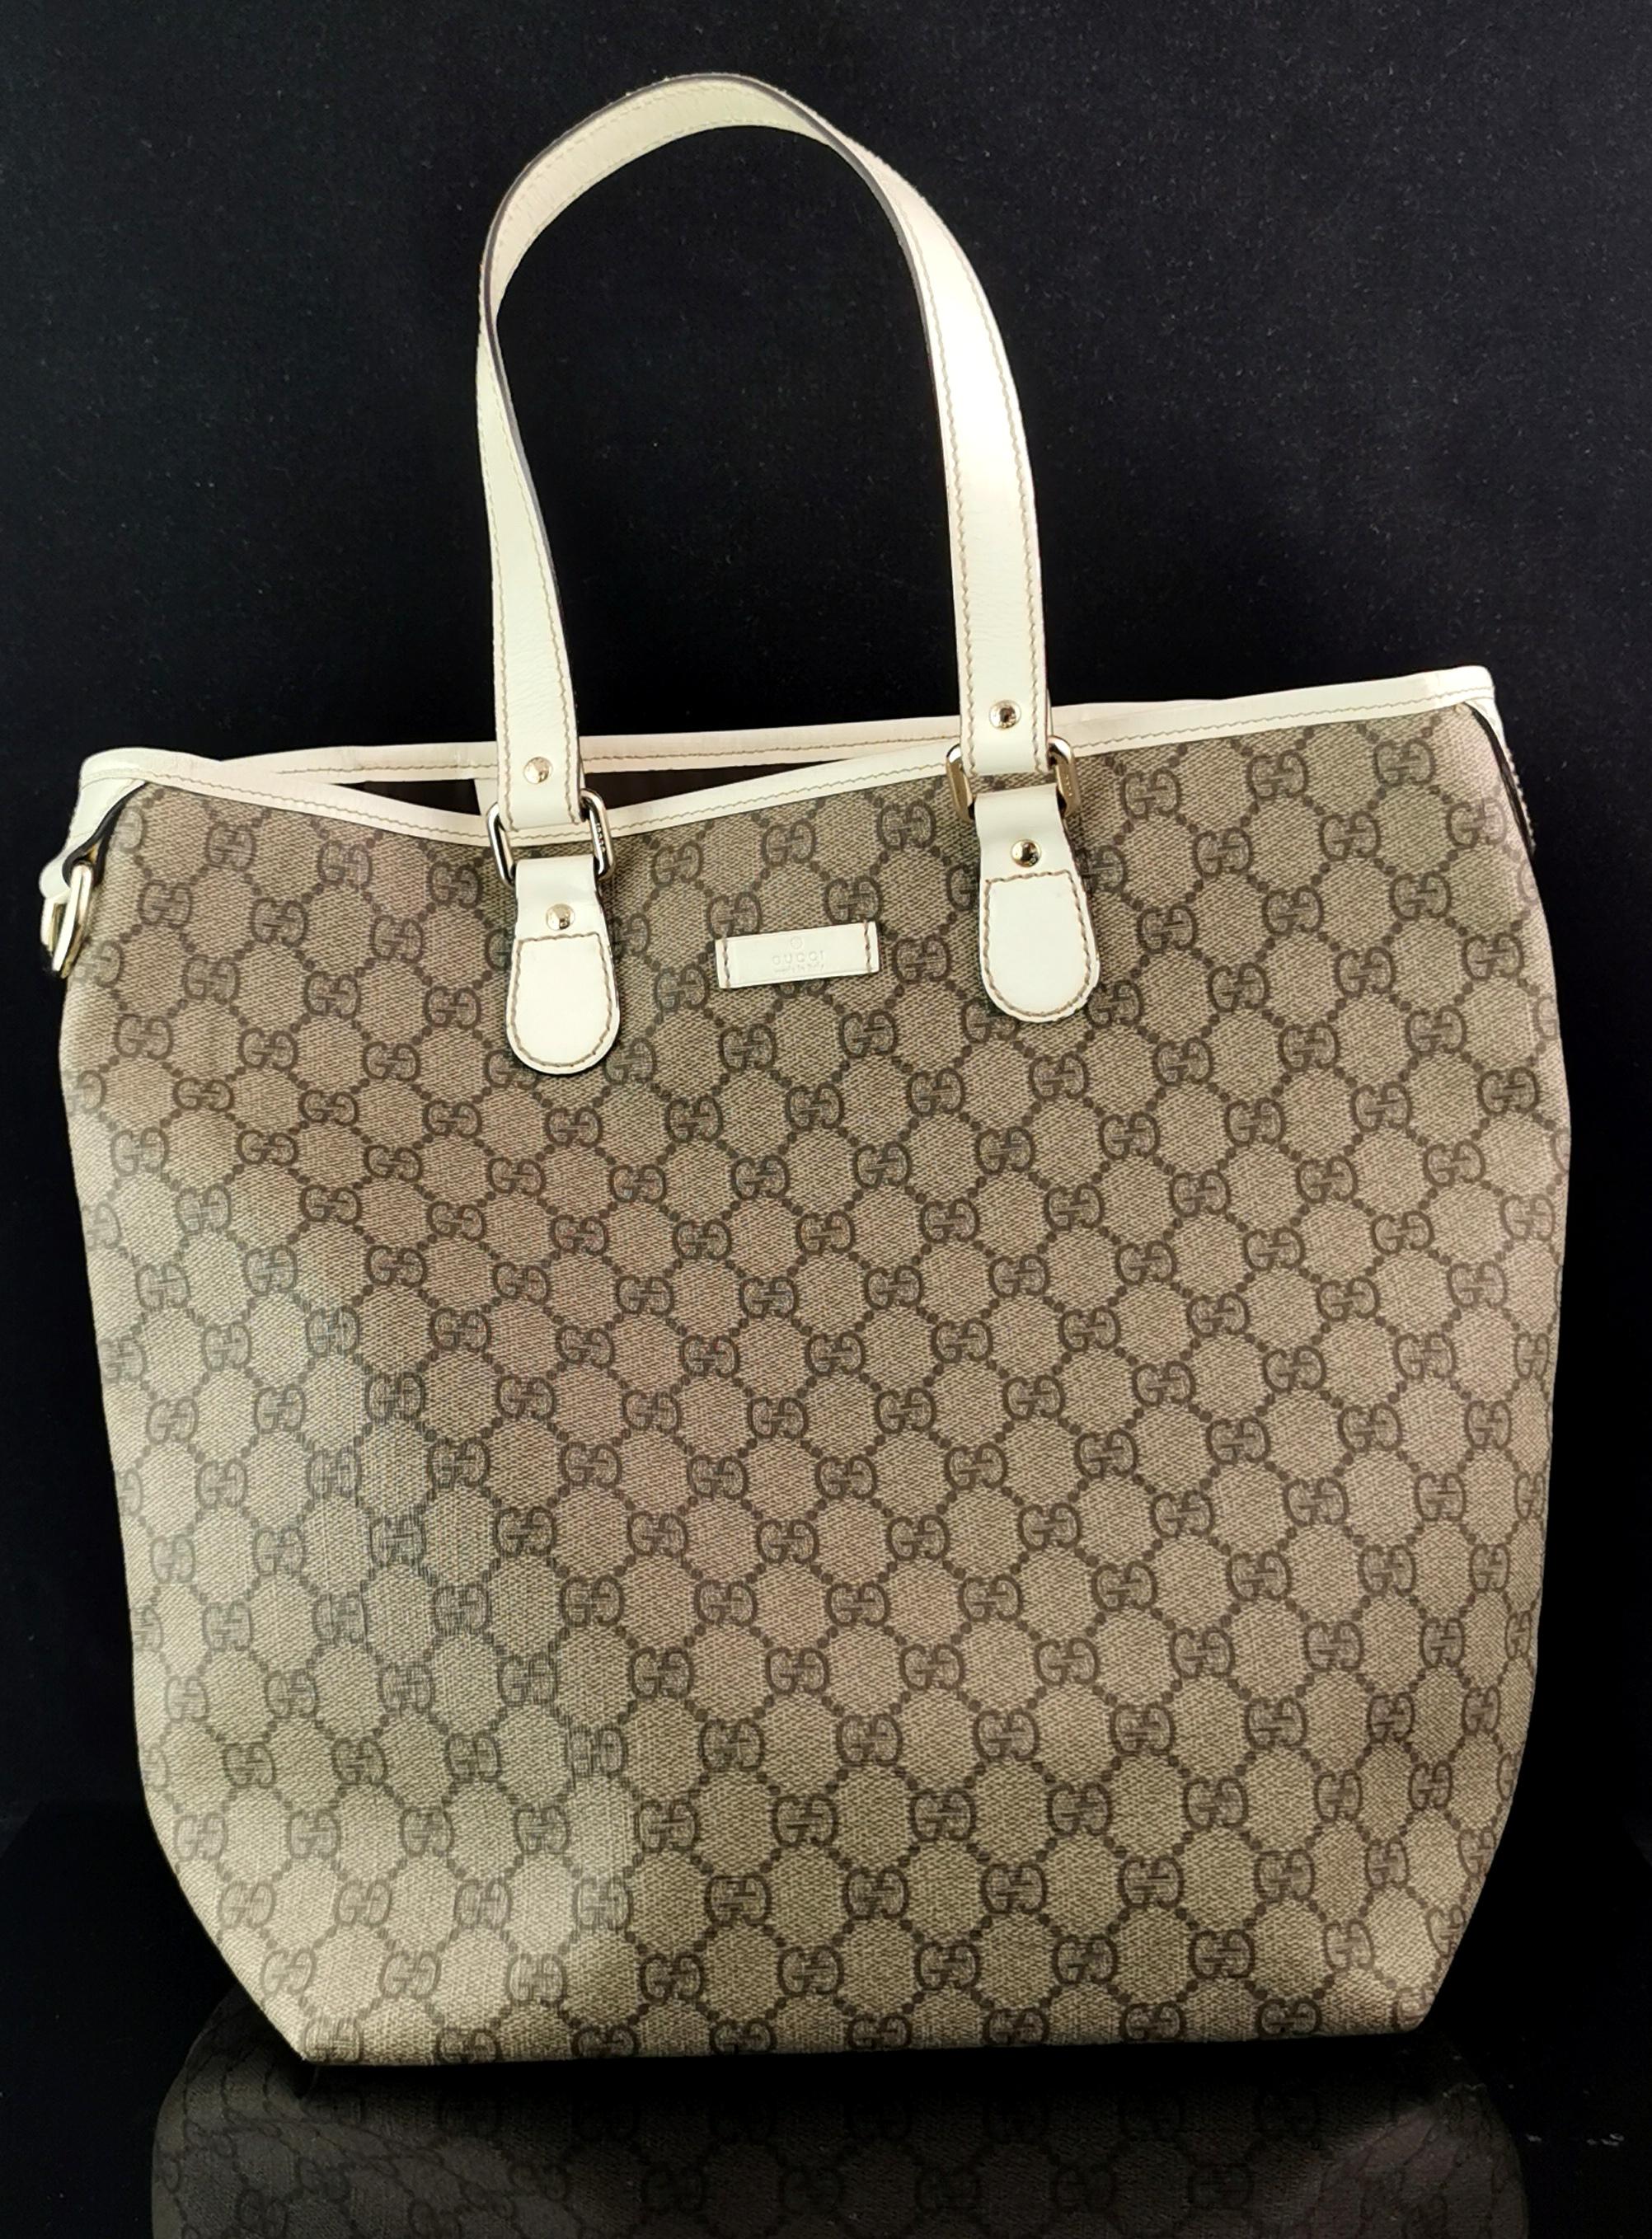 A stylish vintage Gucci GG supreme tote bag.

A tall tote with all over GG monogram to the coated canvas fabric, it is a beige / brown tone with cream leather handles and tags.

The bag is open top with a branded tag to both the outside and inside